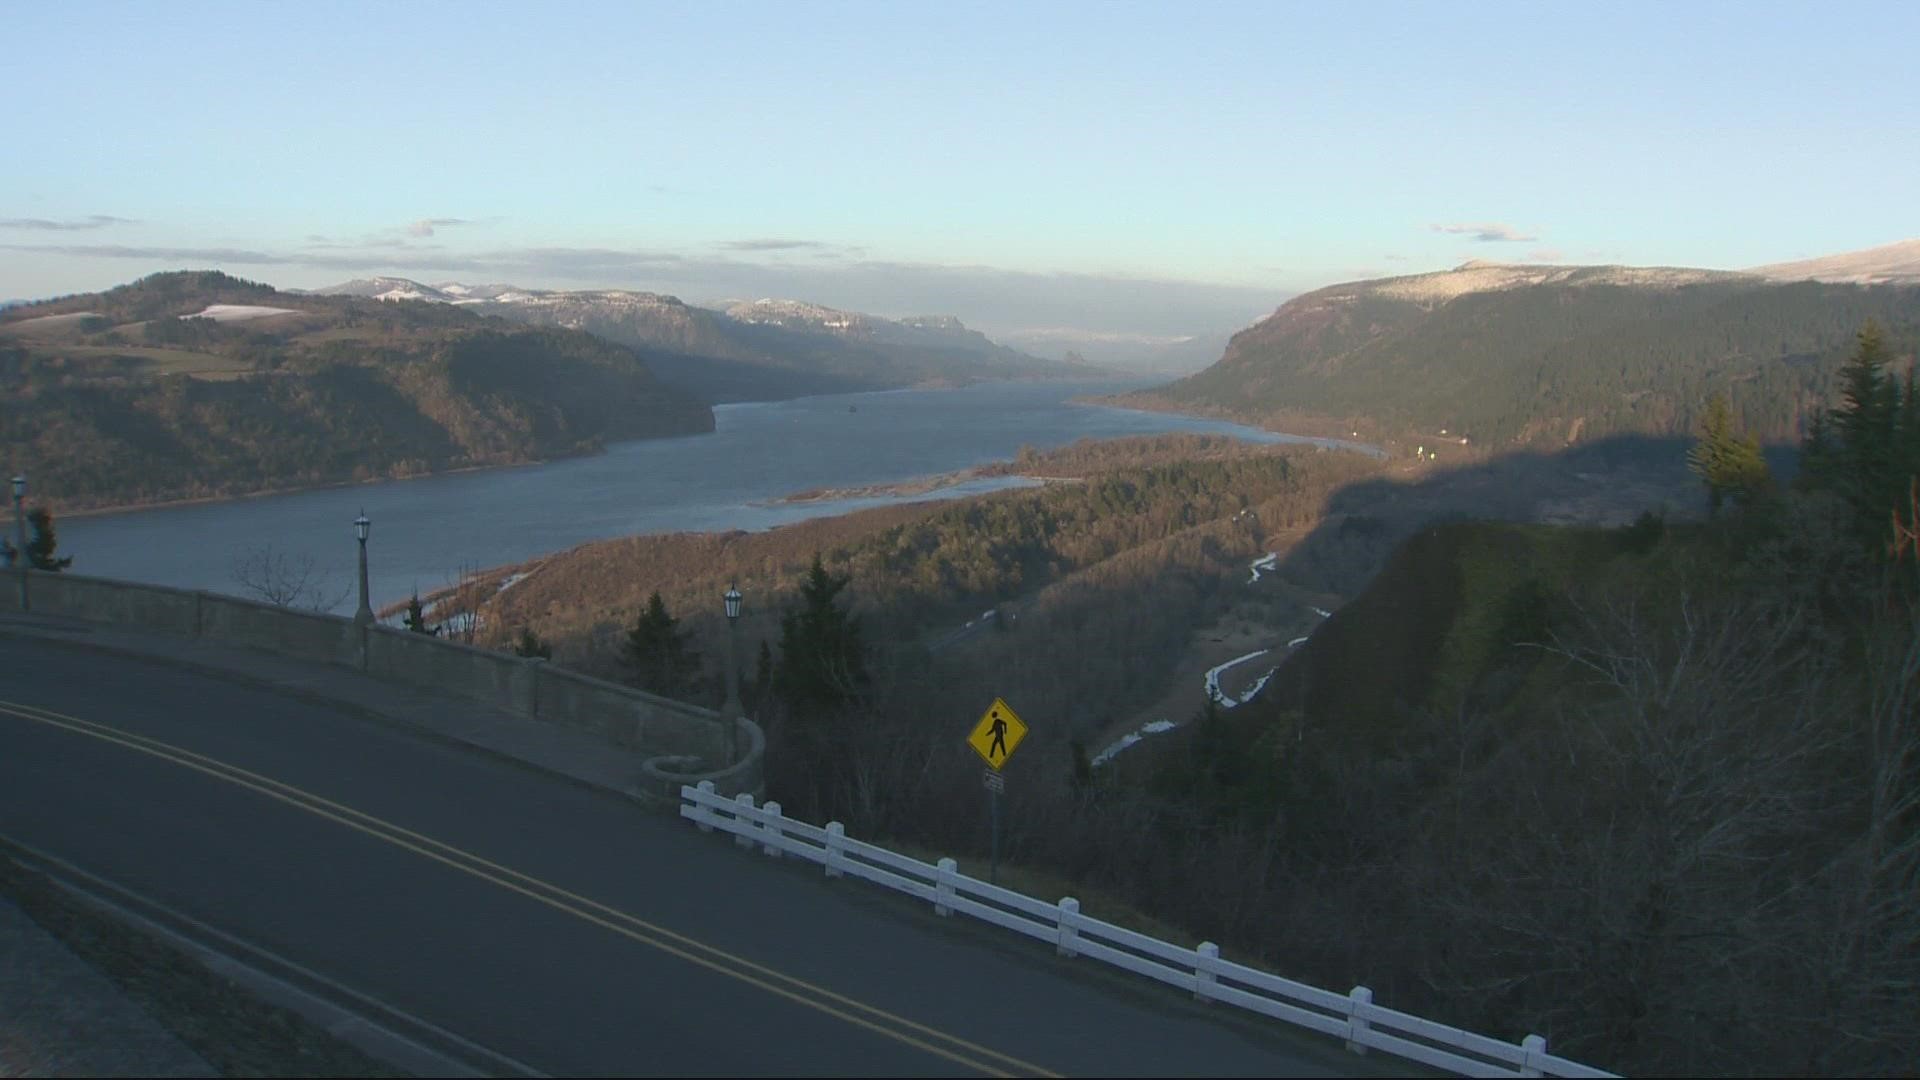 The pilot program aims to curb traffic congestion during the peak summer months. It will require a special permit for the Columbia River Gorge "waterfall corridor."